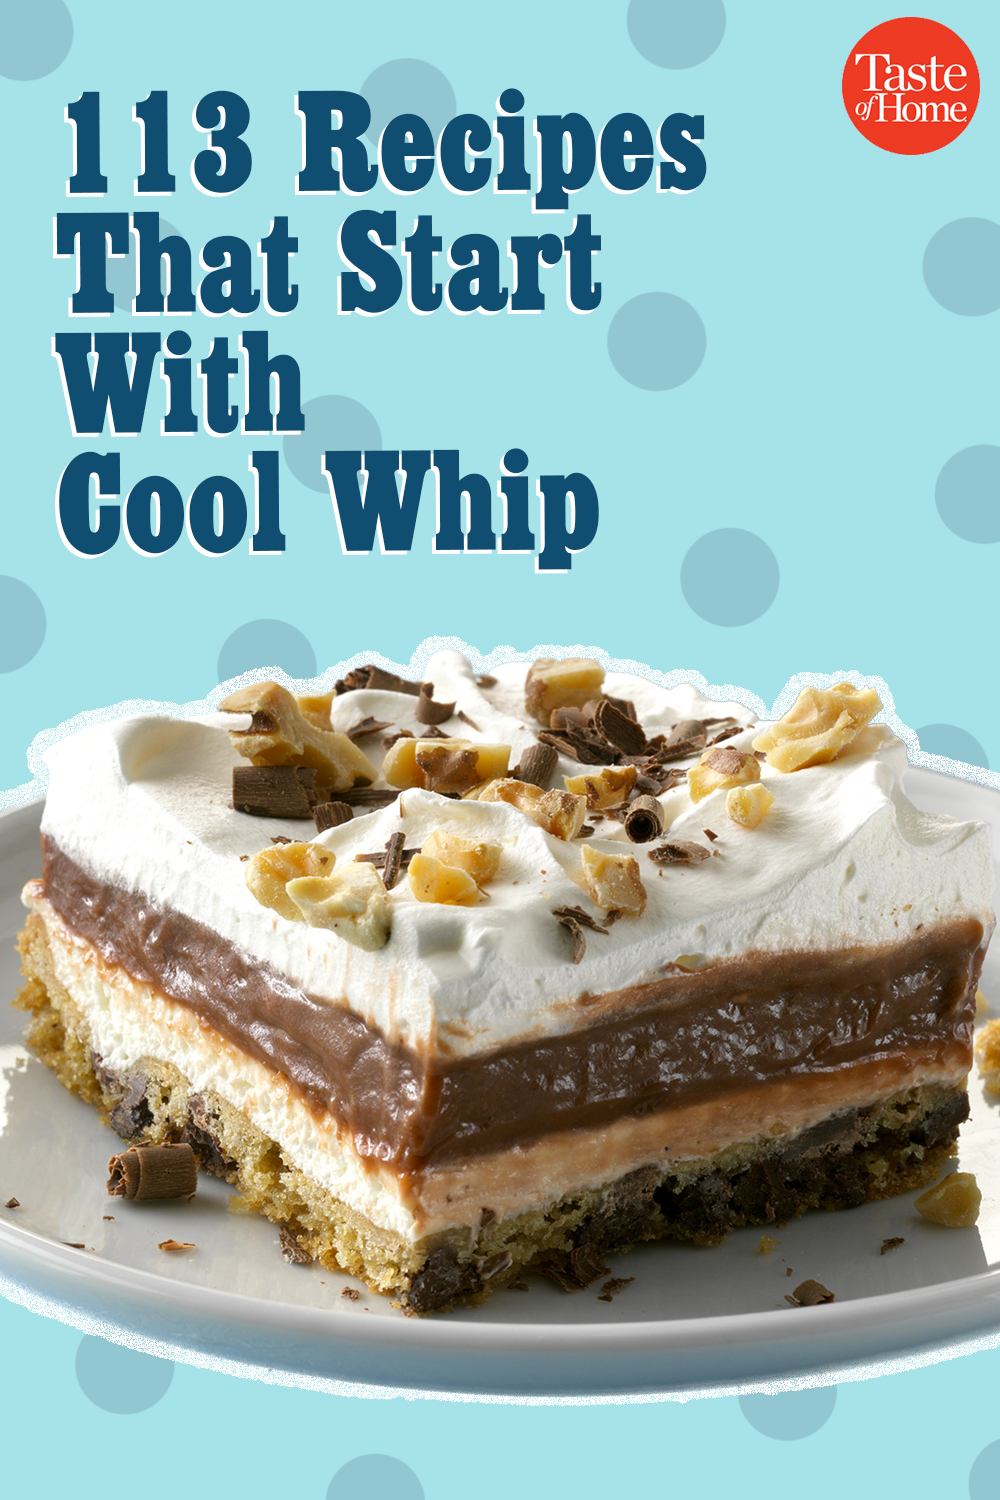 113 Recipes That Start With Cool Whip -   17 desserts Pudding cool whip ideas